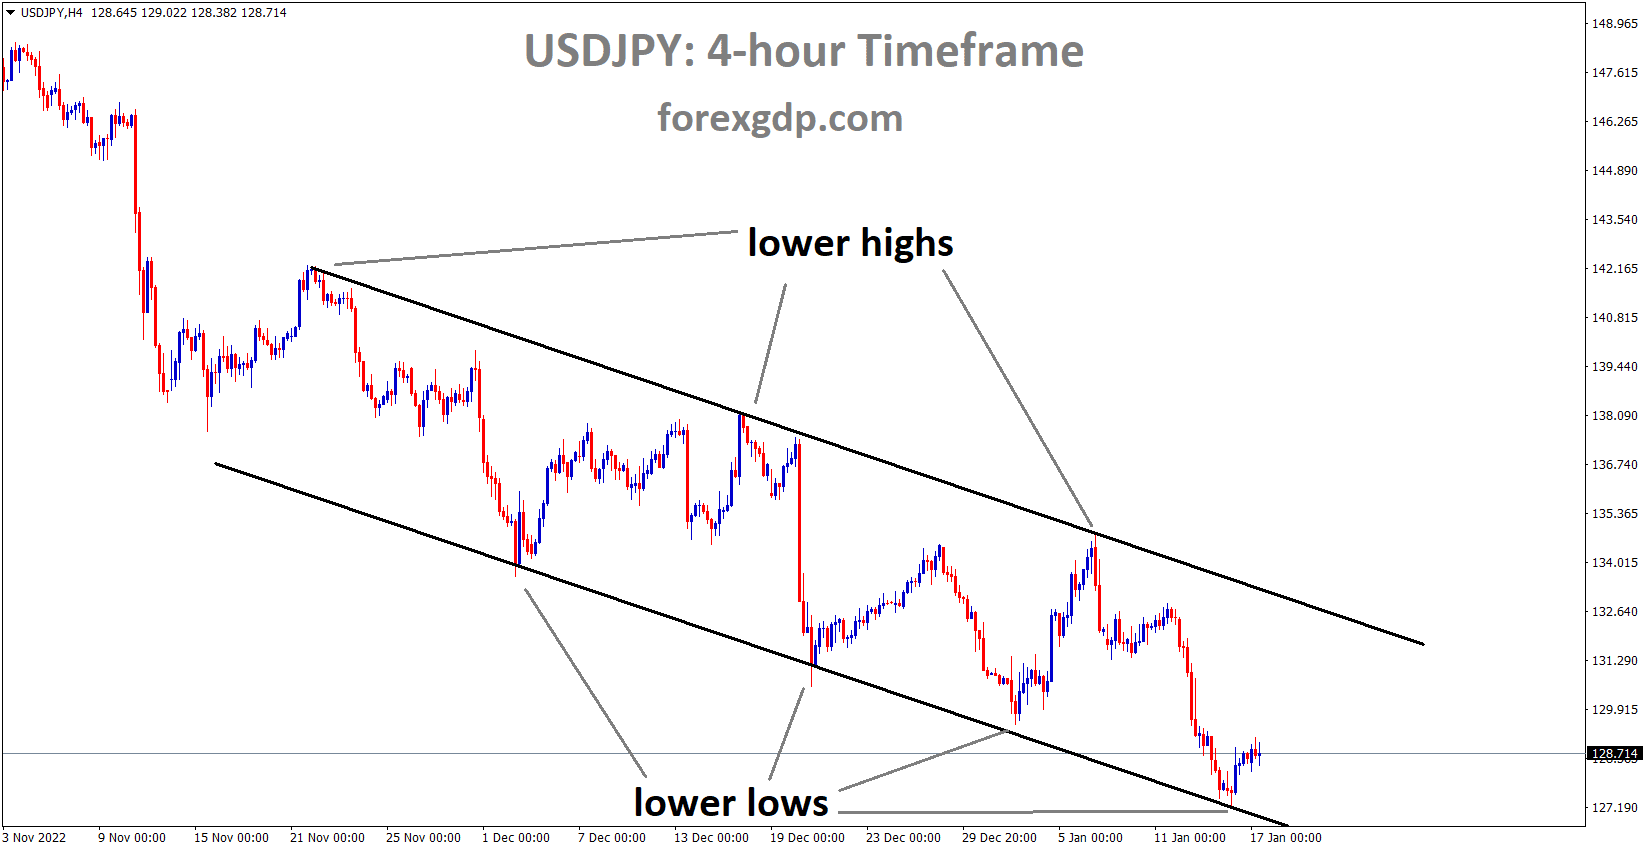 USDJPY is moving in the Descending channel and the market has rebounded from the lower low area of the channel 1